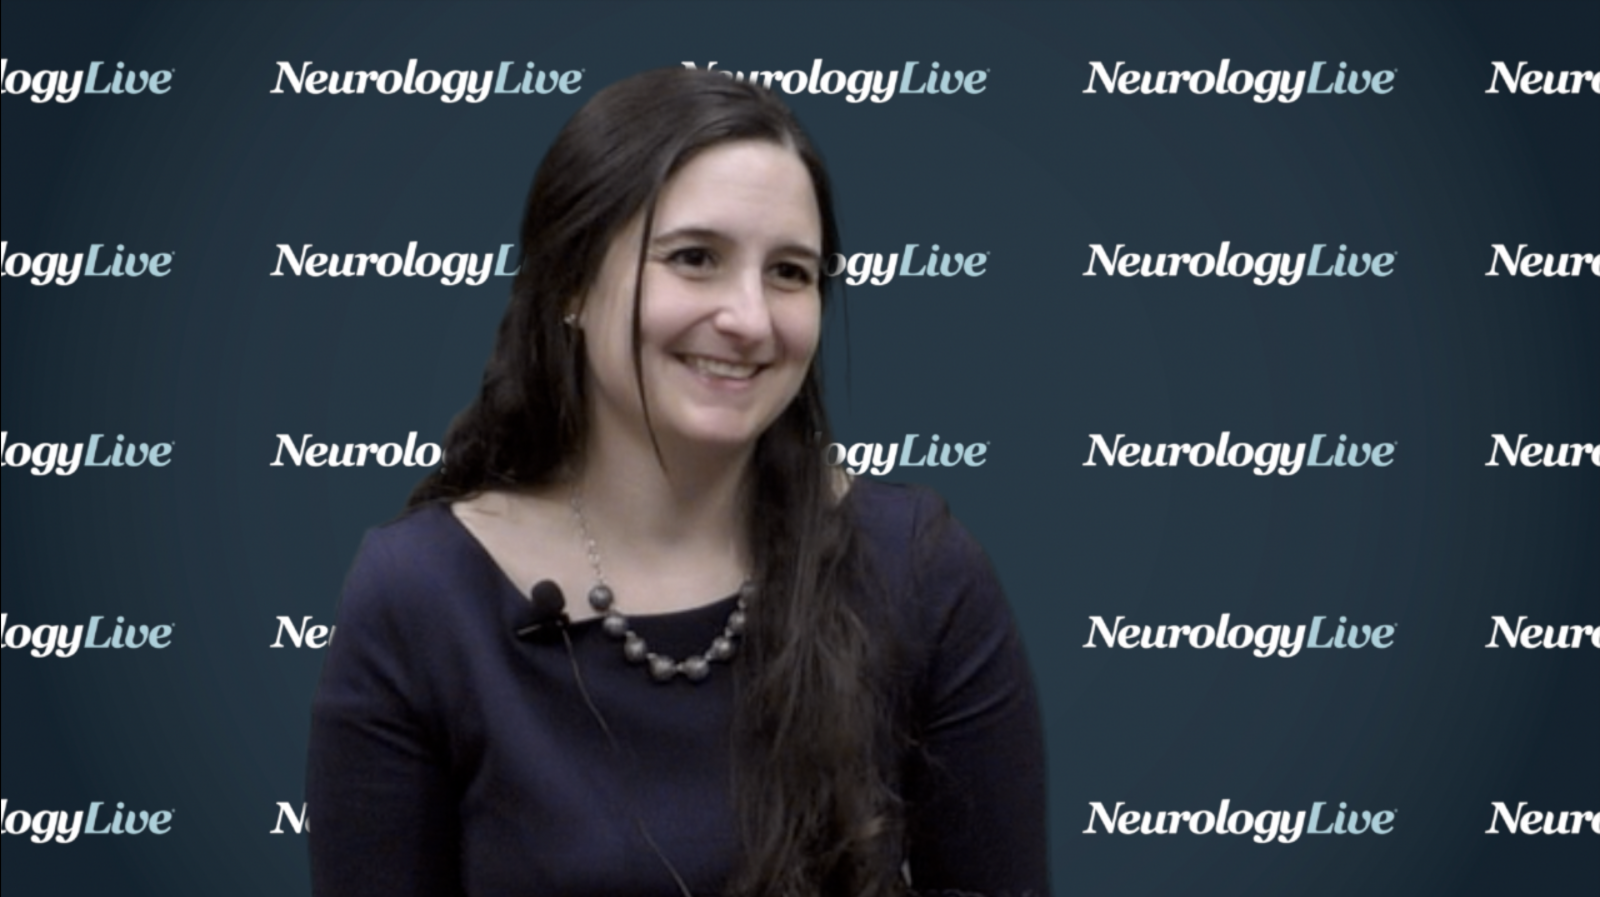 Marisa McGinley, DO: Advantages of Outpatient Telemedicine in Neurology Subspecialties